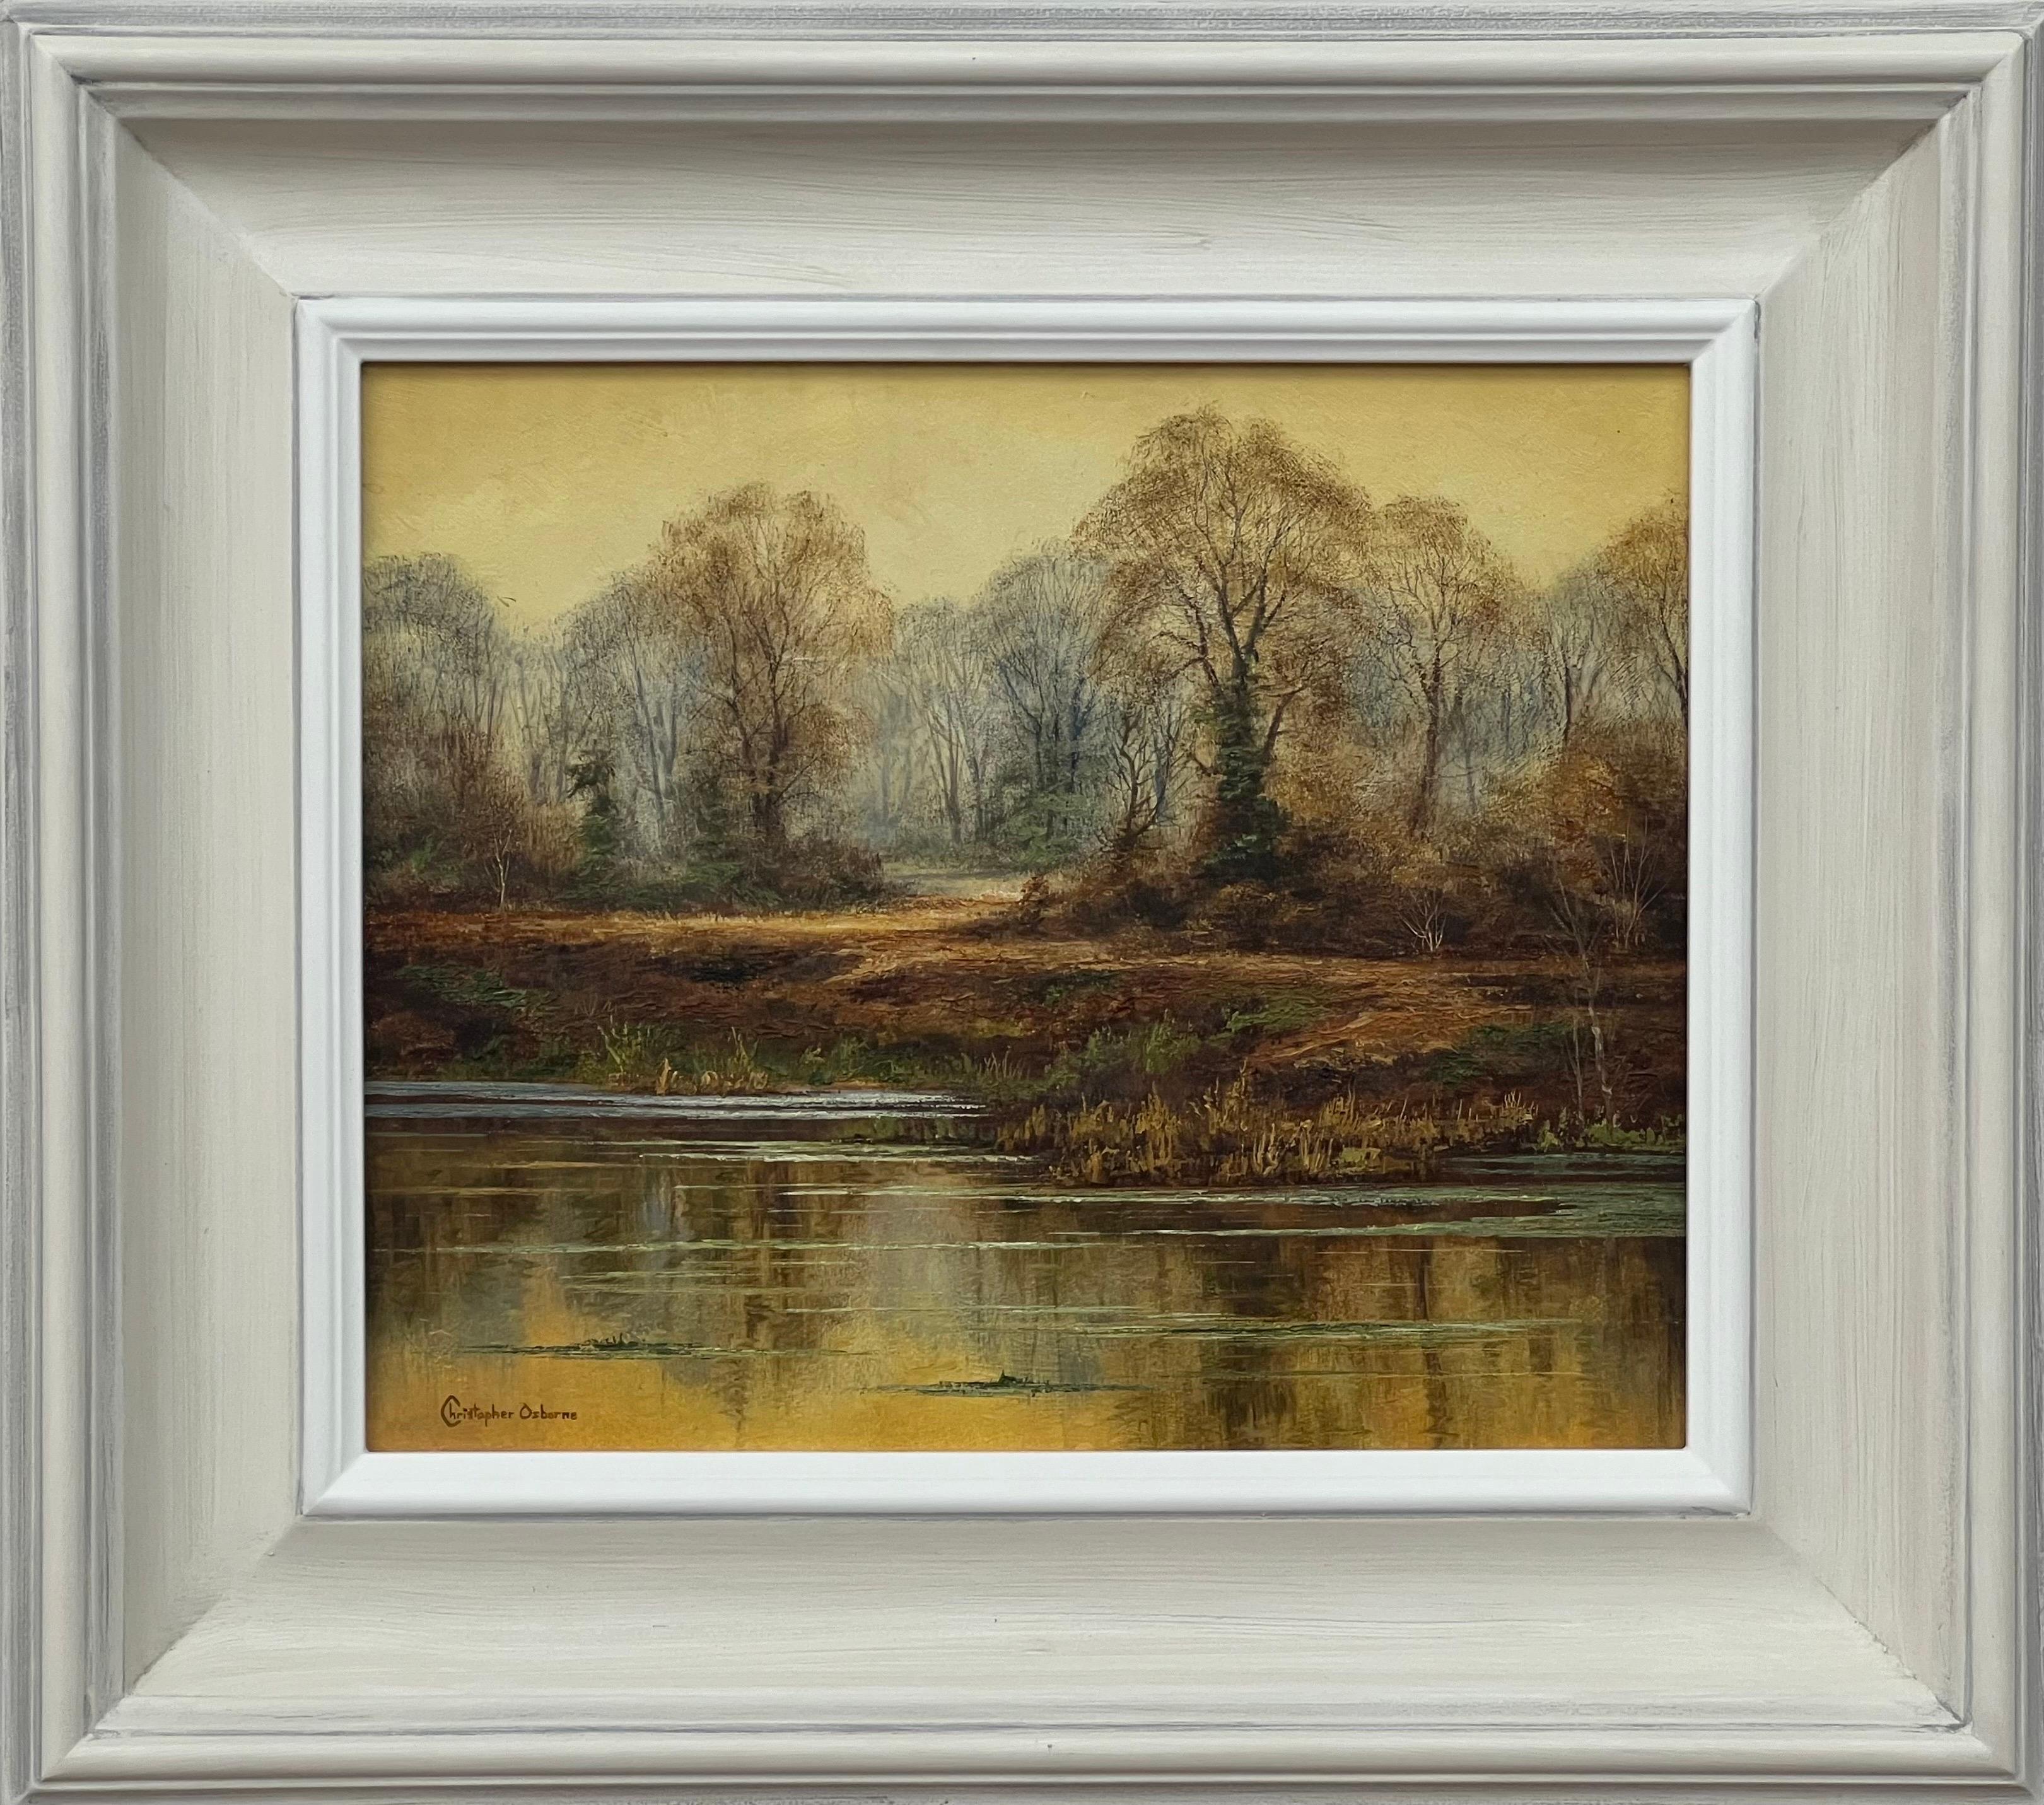 Christopher Osborne Landscape Painting - Reflections on Forest Pond in the English Countryside with Warm Yellows & Browns